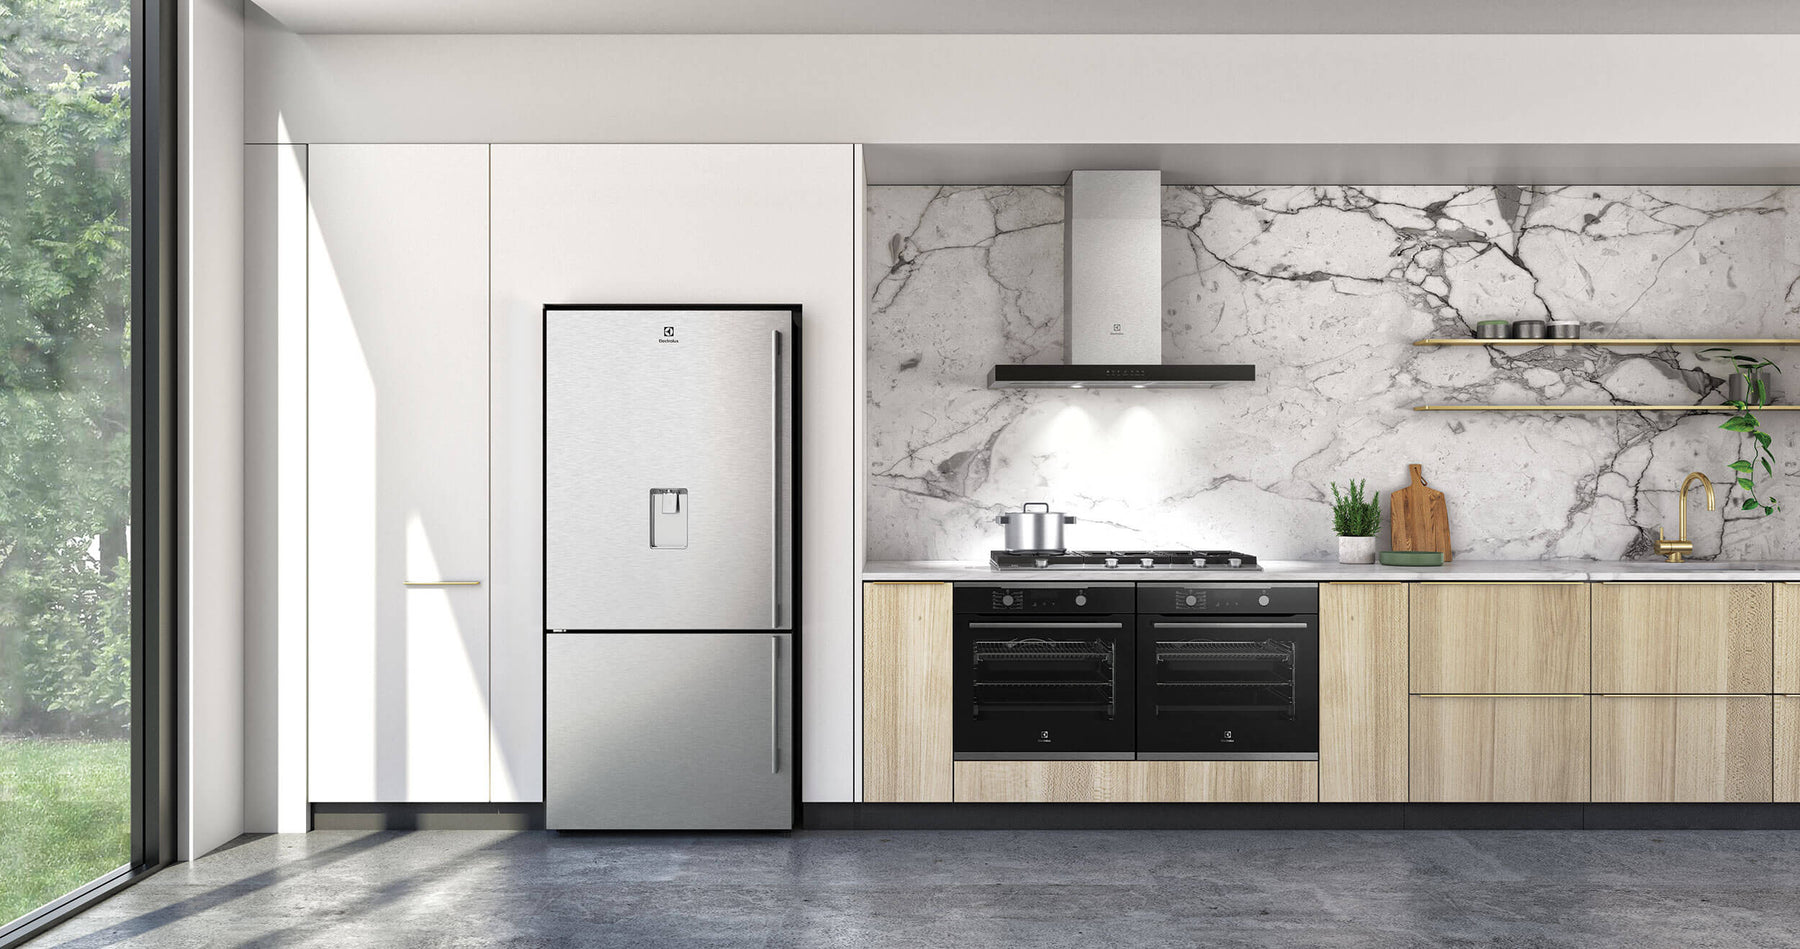 What Are The Different Types Of Refrigerators? Our Fridge Buying Guide